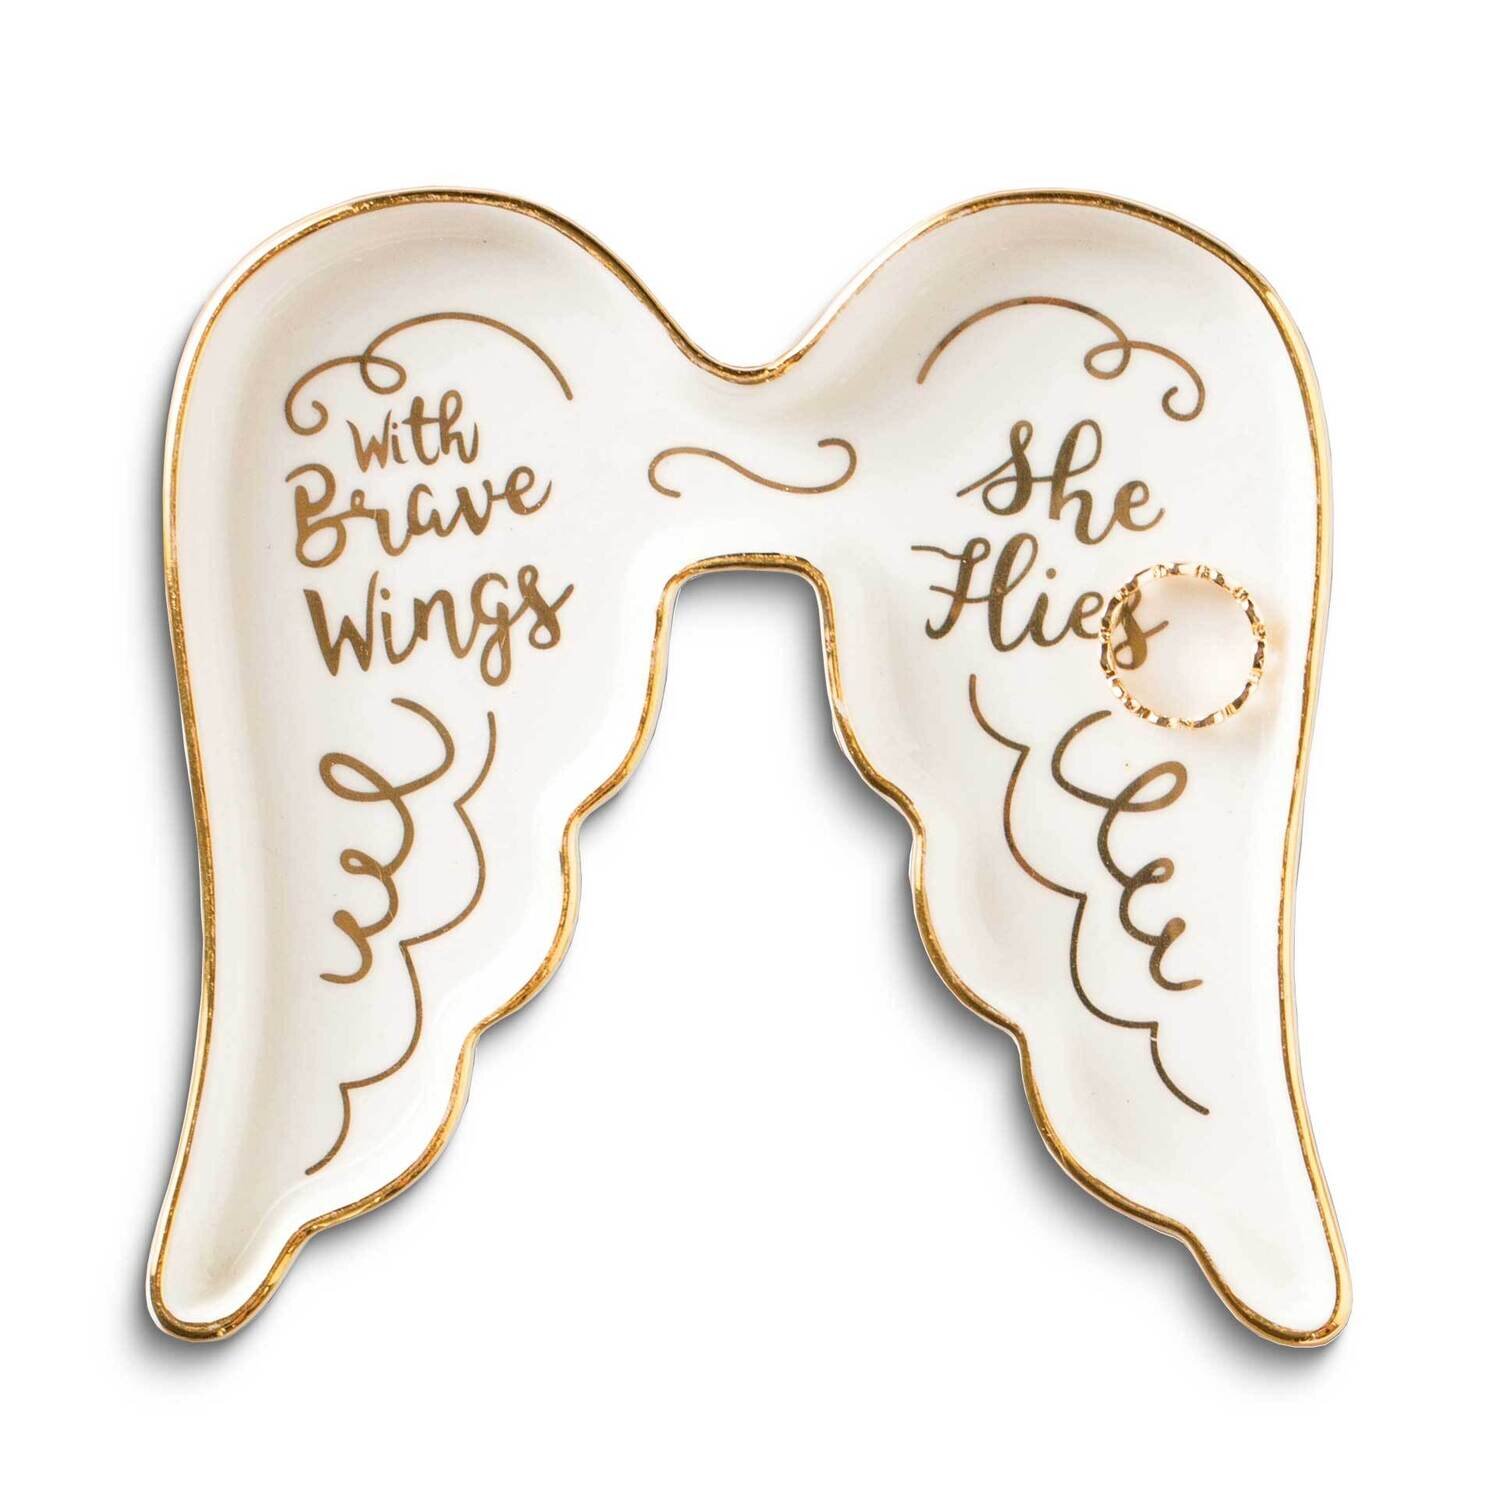 White with Gold-tone WITH BRAVE WINGS SHE FLIES Ceramic Trinket Dish GM25213